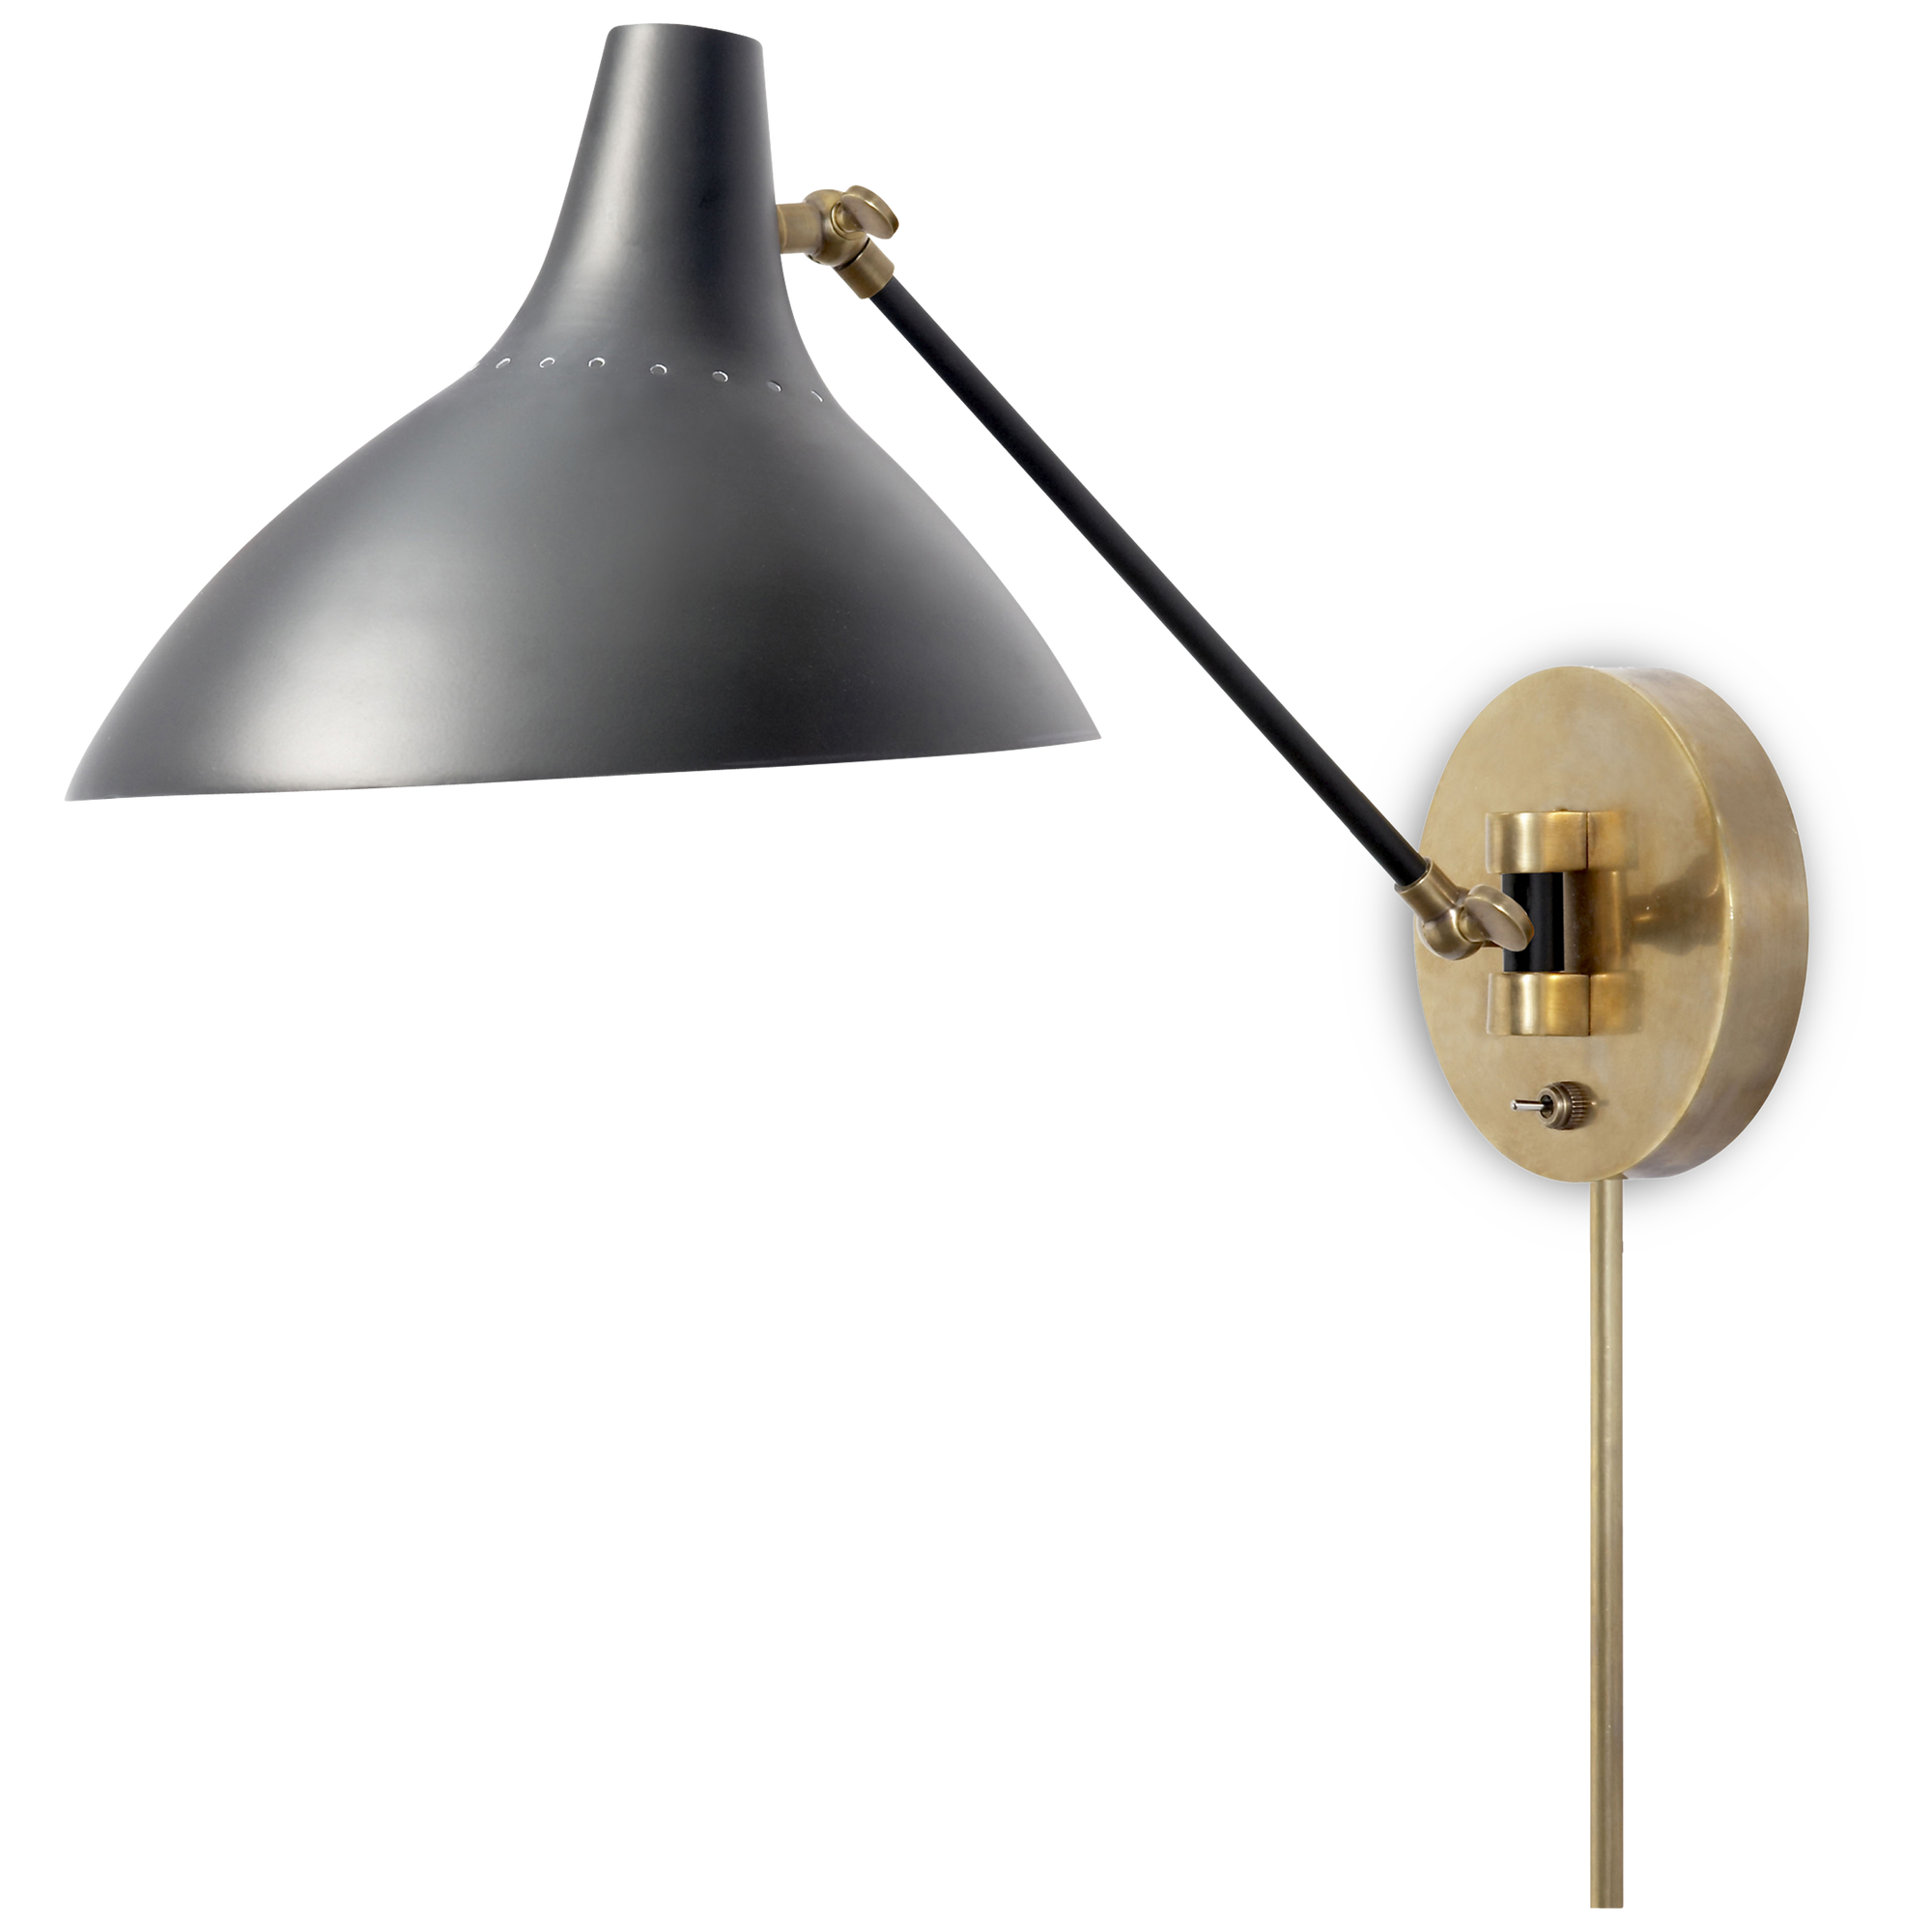 Classic and sophisticated black wall sconce with hand rubbed antique brass accents.